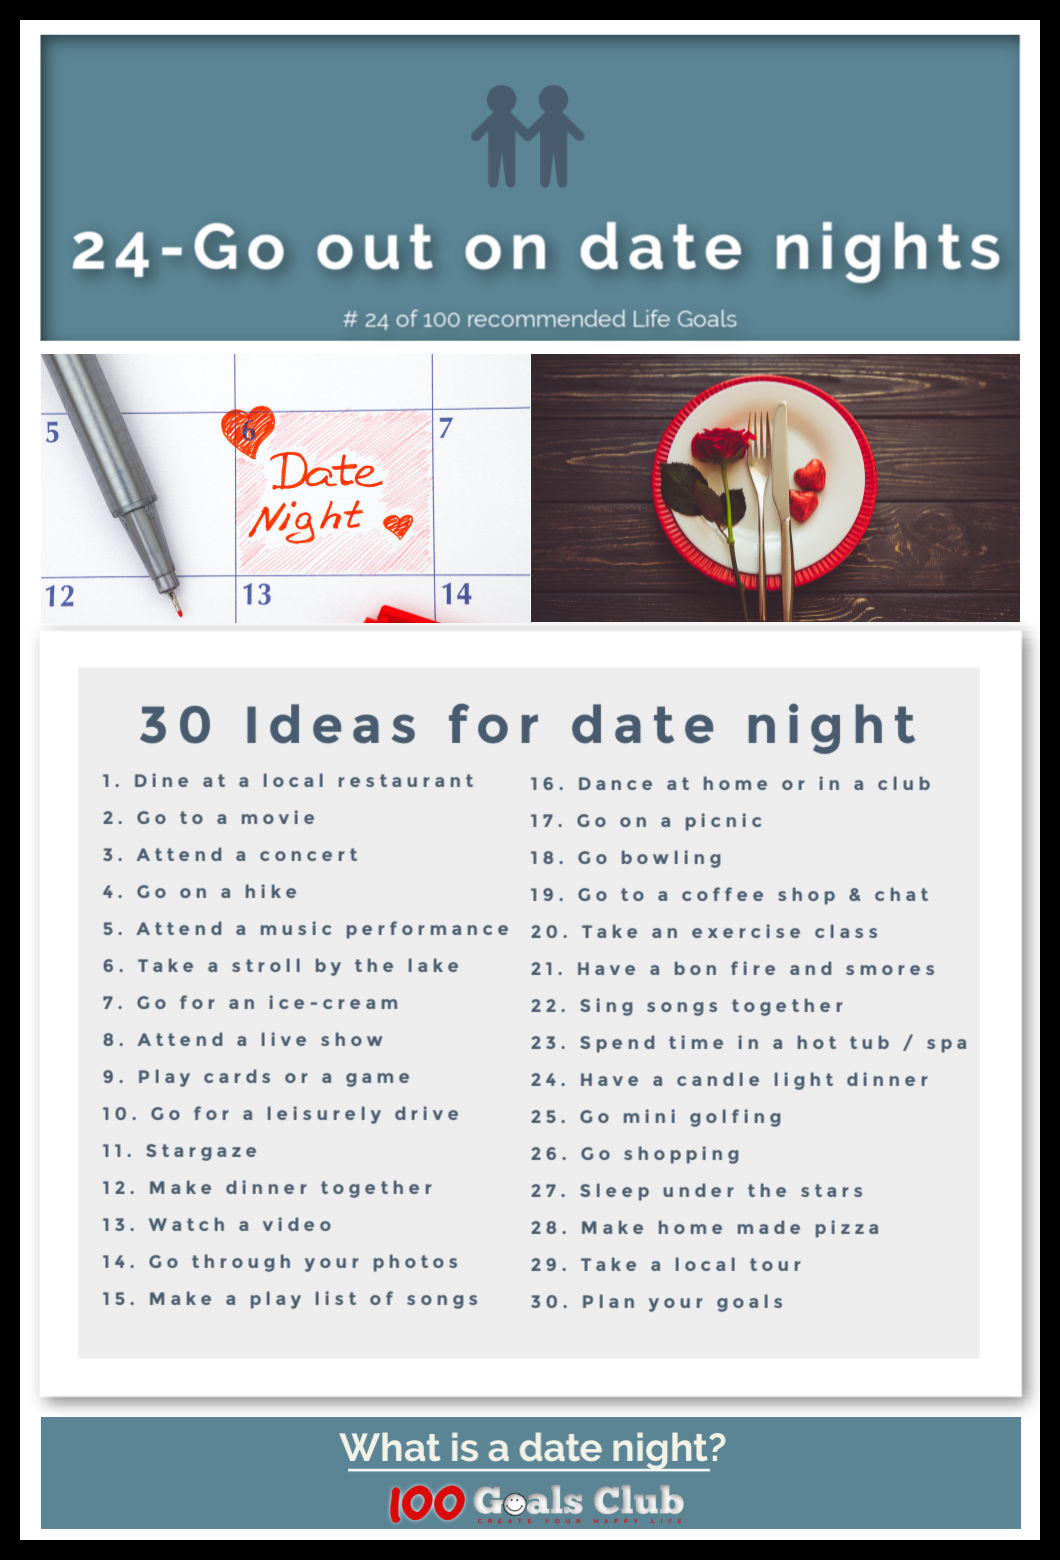 What is a date night?